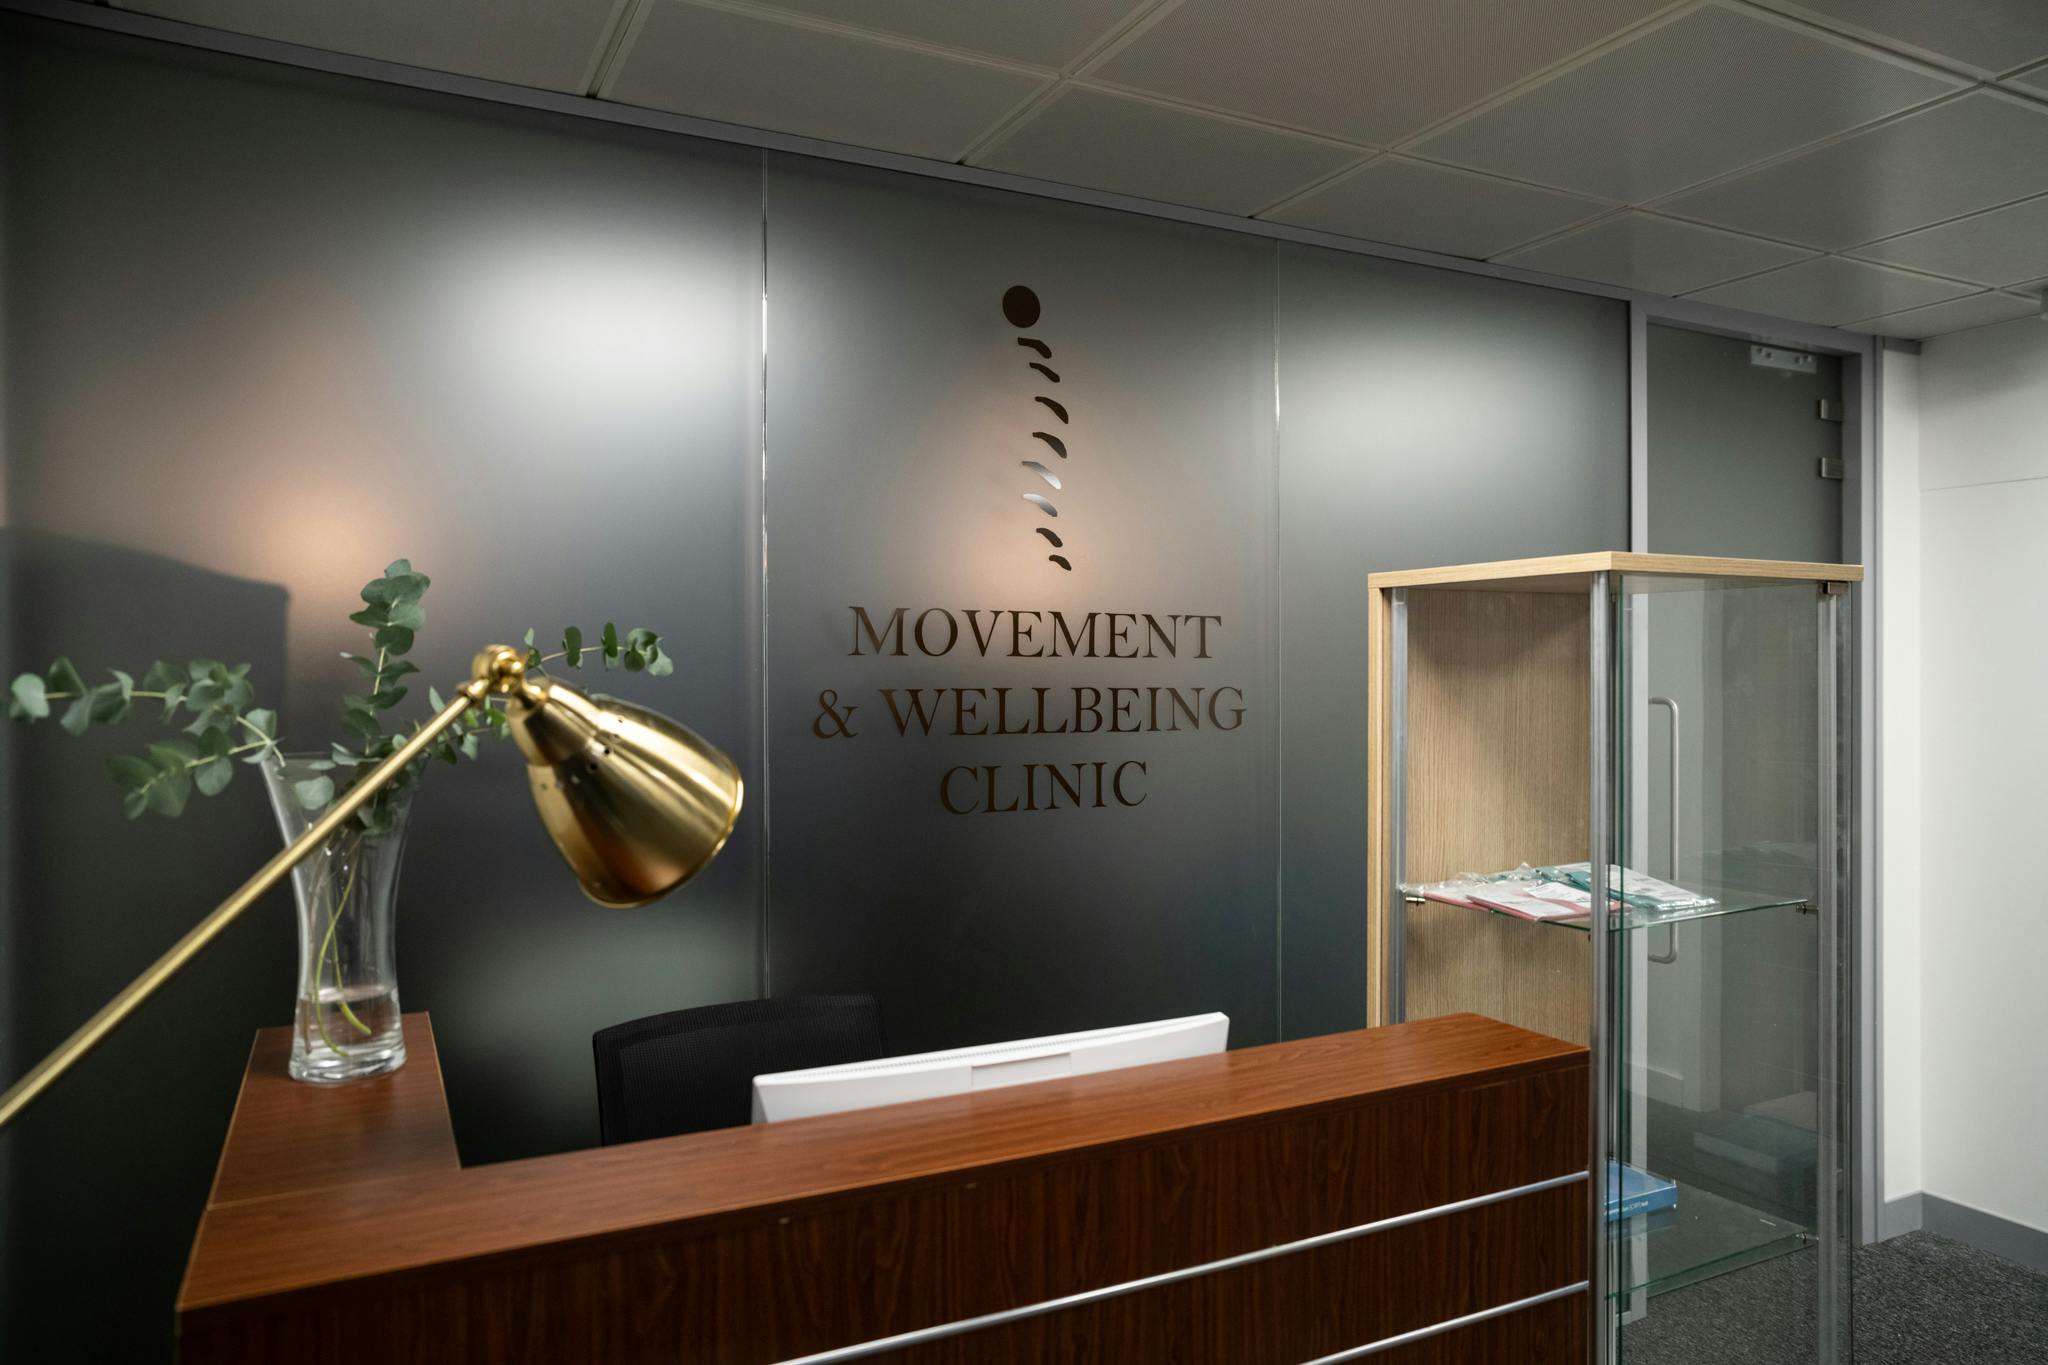 Get to know: Movement & Wellbeing Clinic